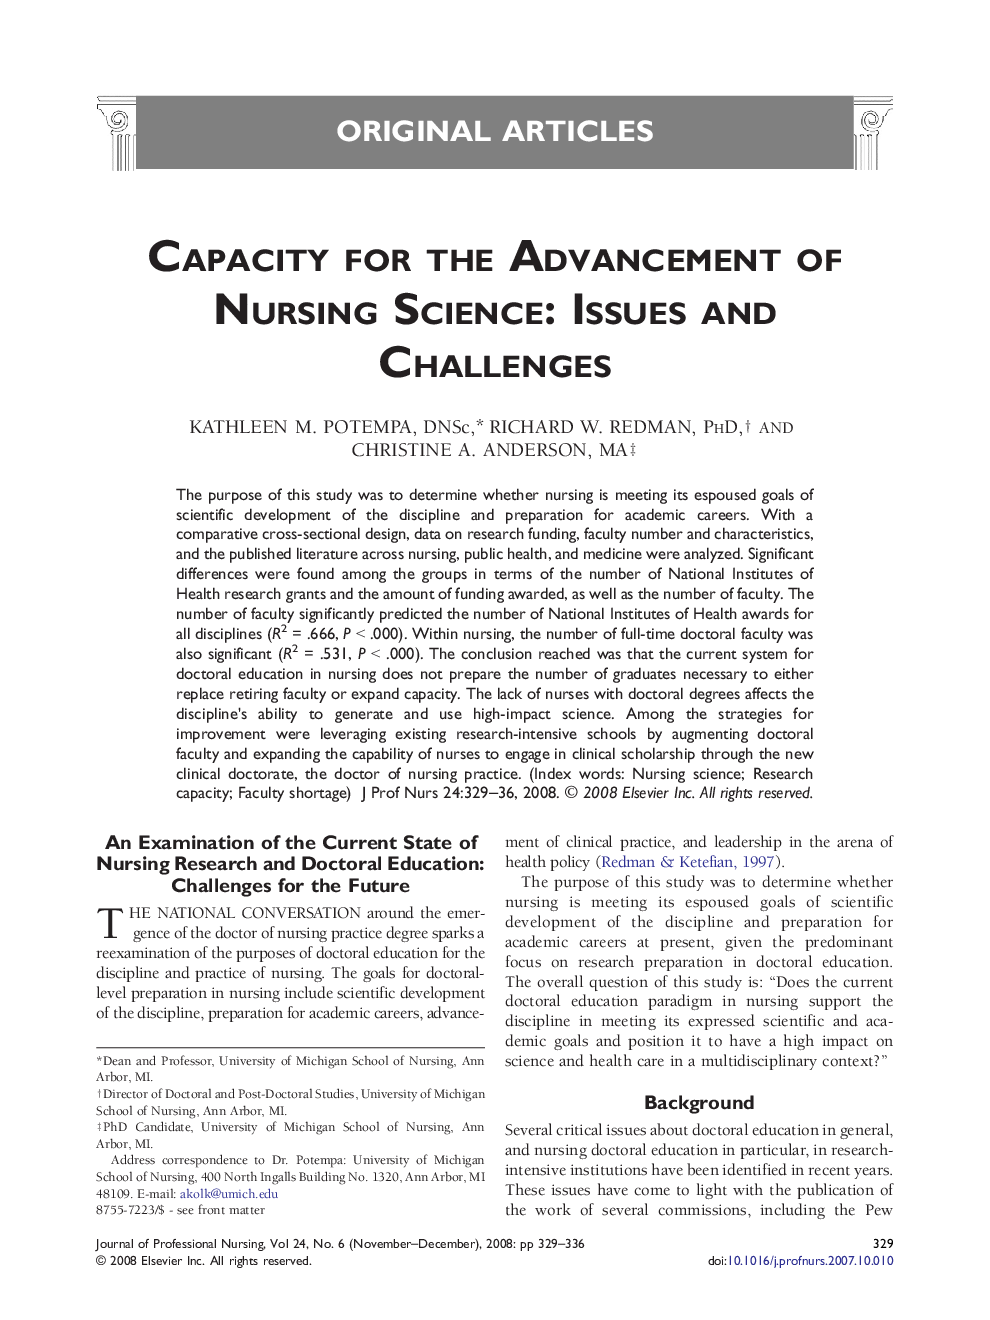 Capacity for the Advancement of Nursing Science: Issues and Challenges